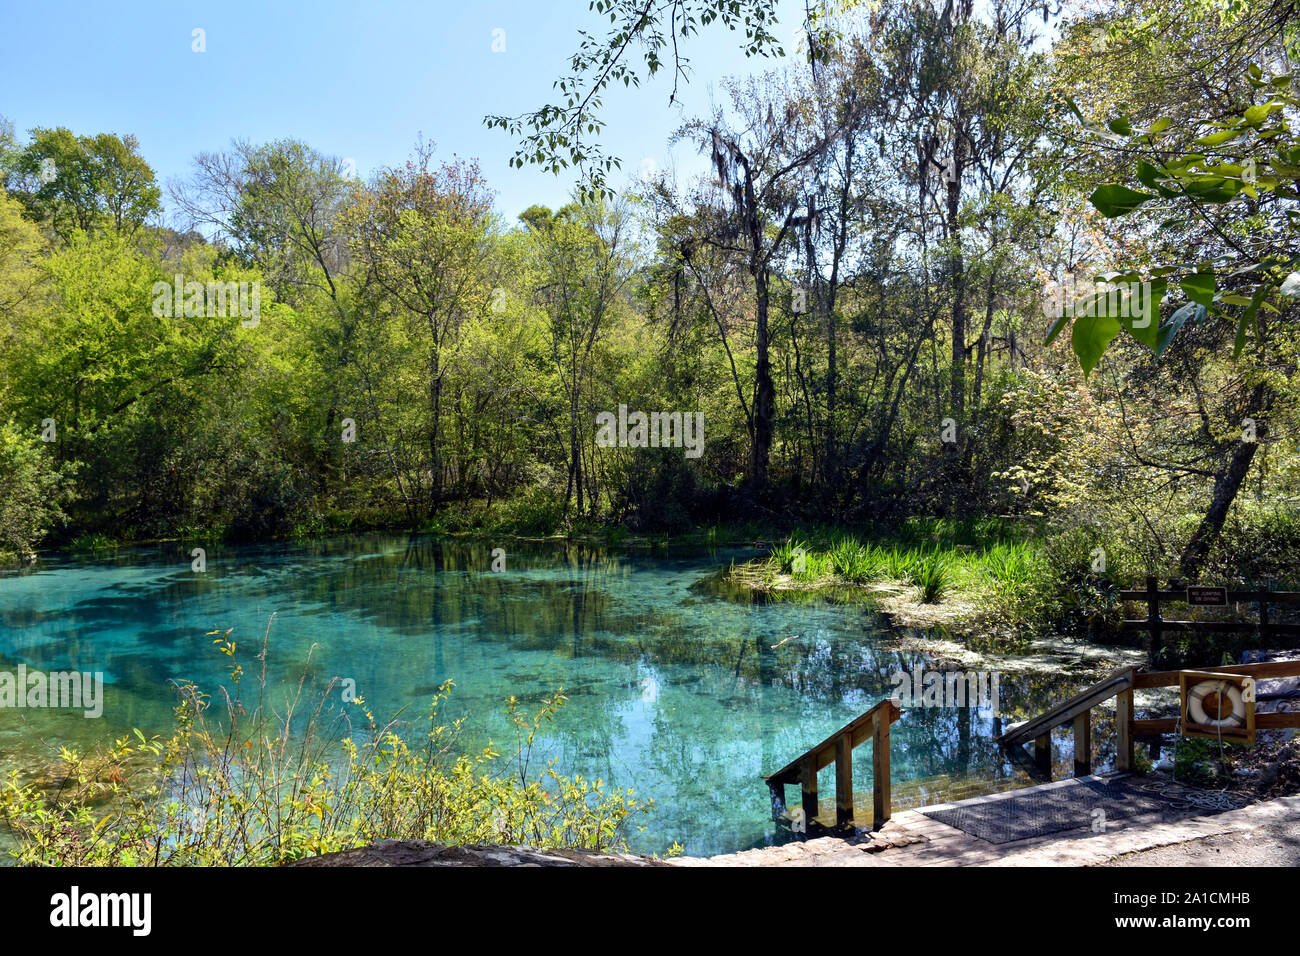 Ichetucknee Springs State Park in Florida, USA is off the beaten path and a popular place for tubing, kayaking and other water sports. Stock Photo